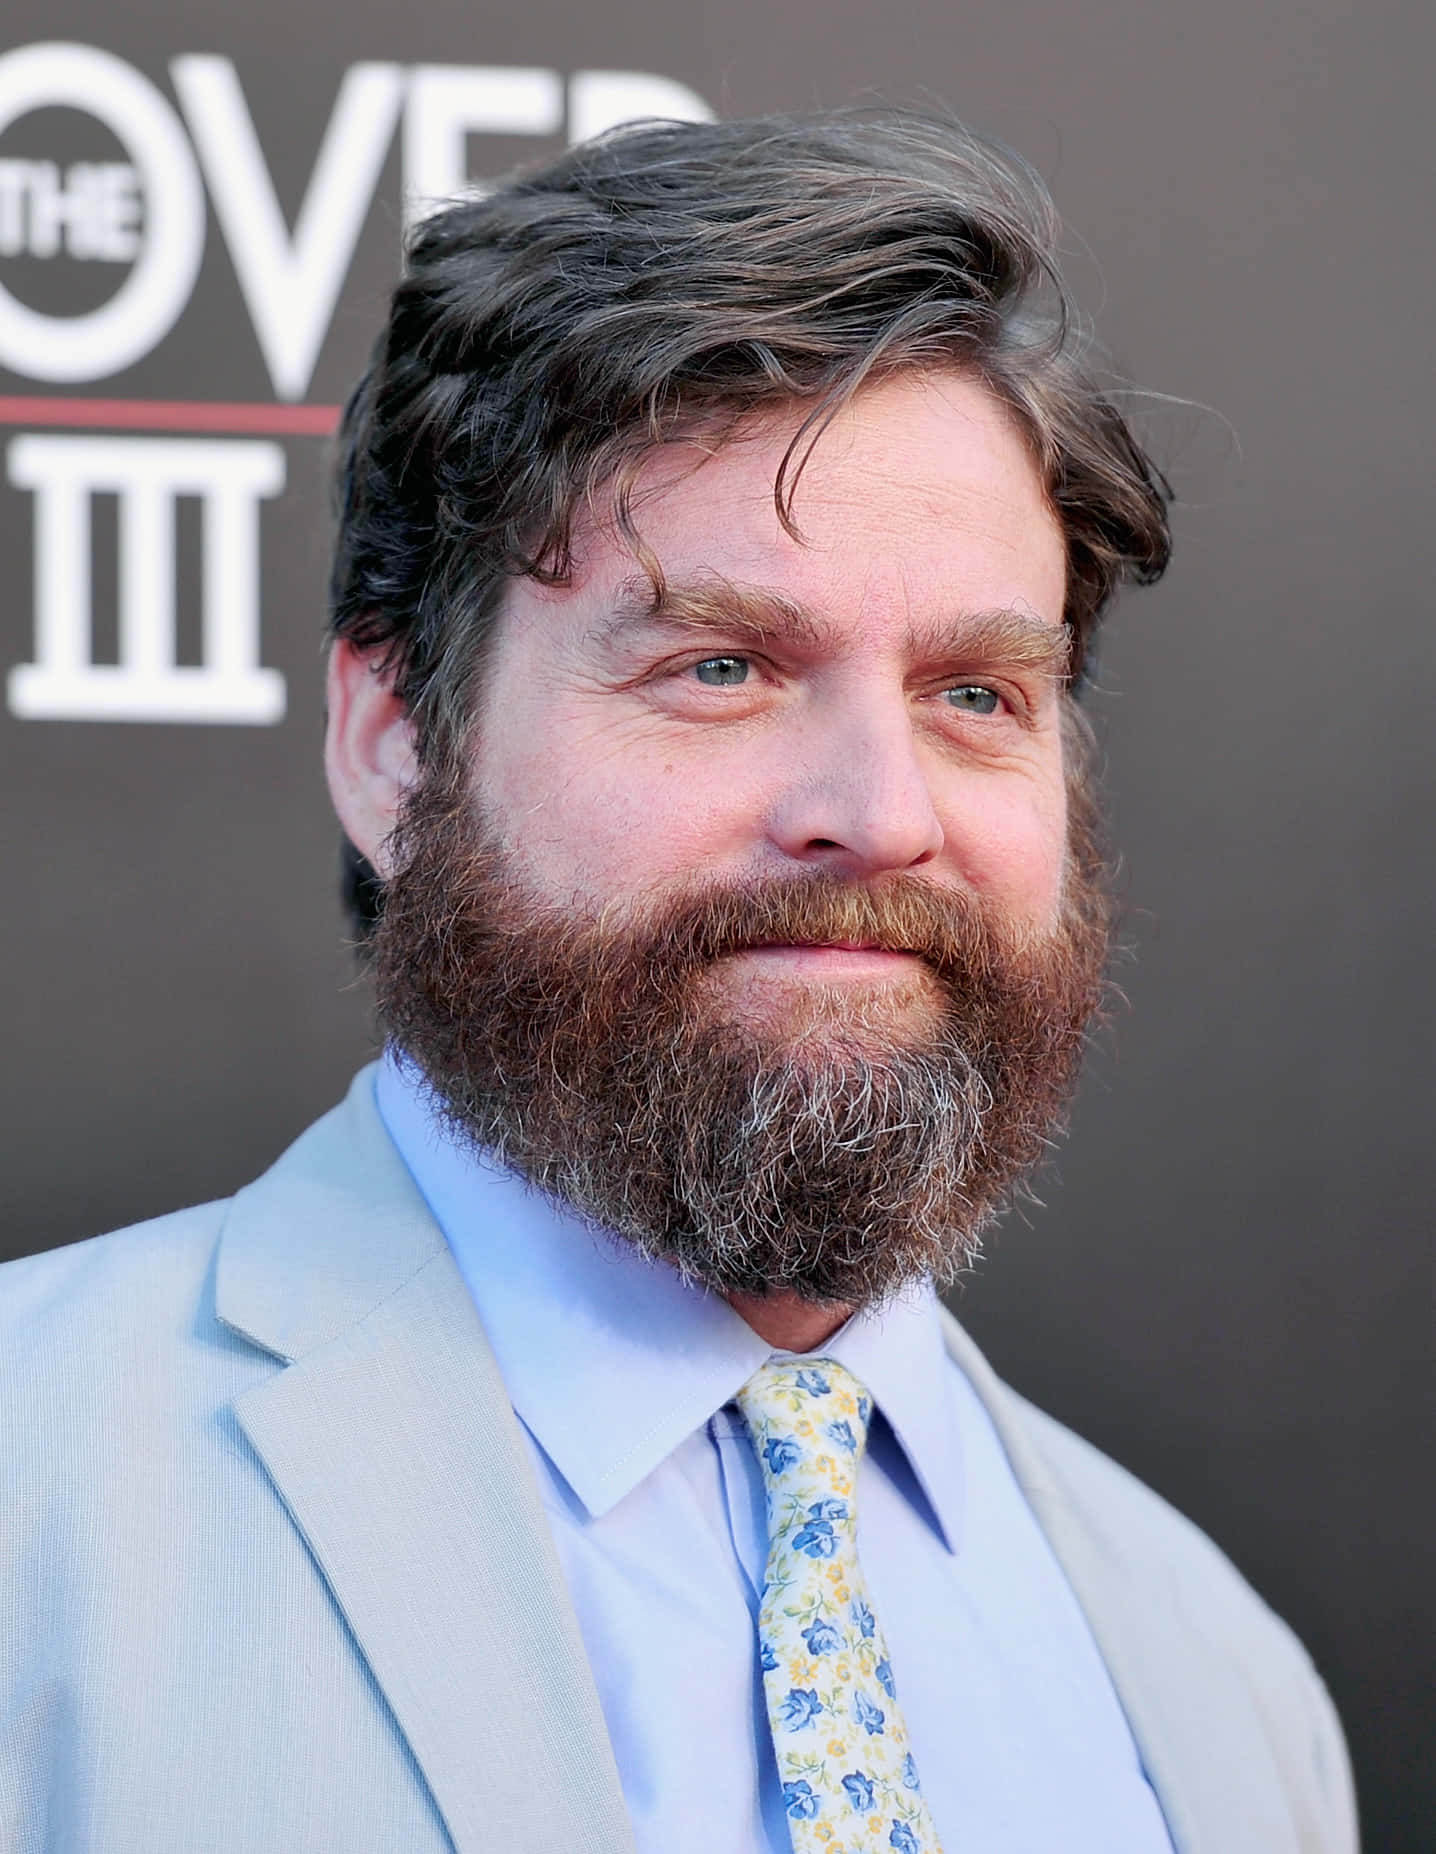 Caption: "Professional headshot of Actor and Comedian Zach Galifianakis" Wallpaper